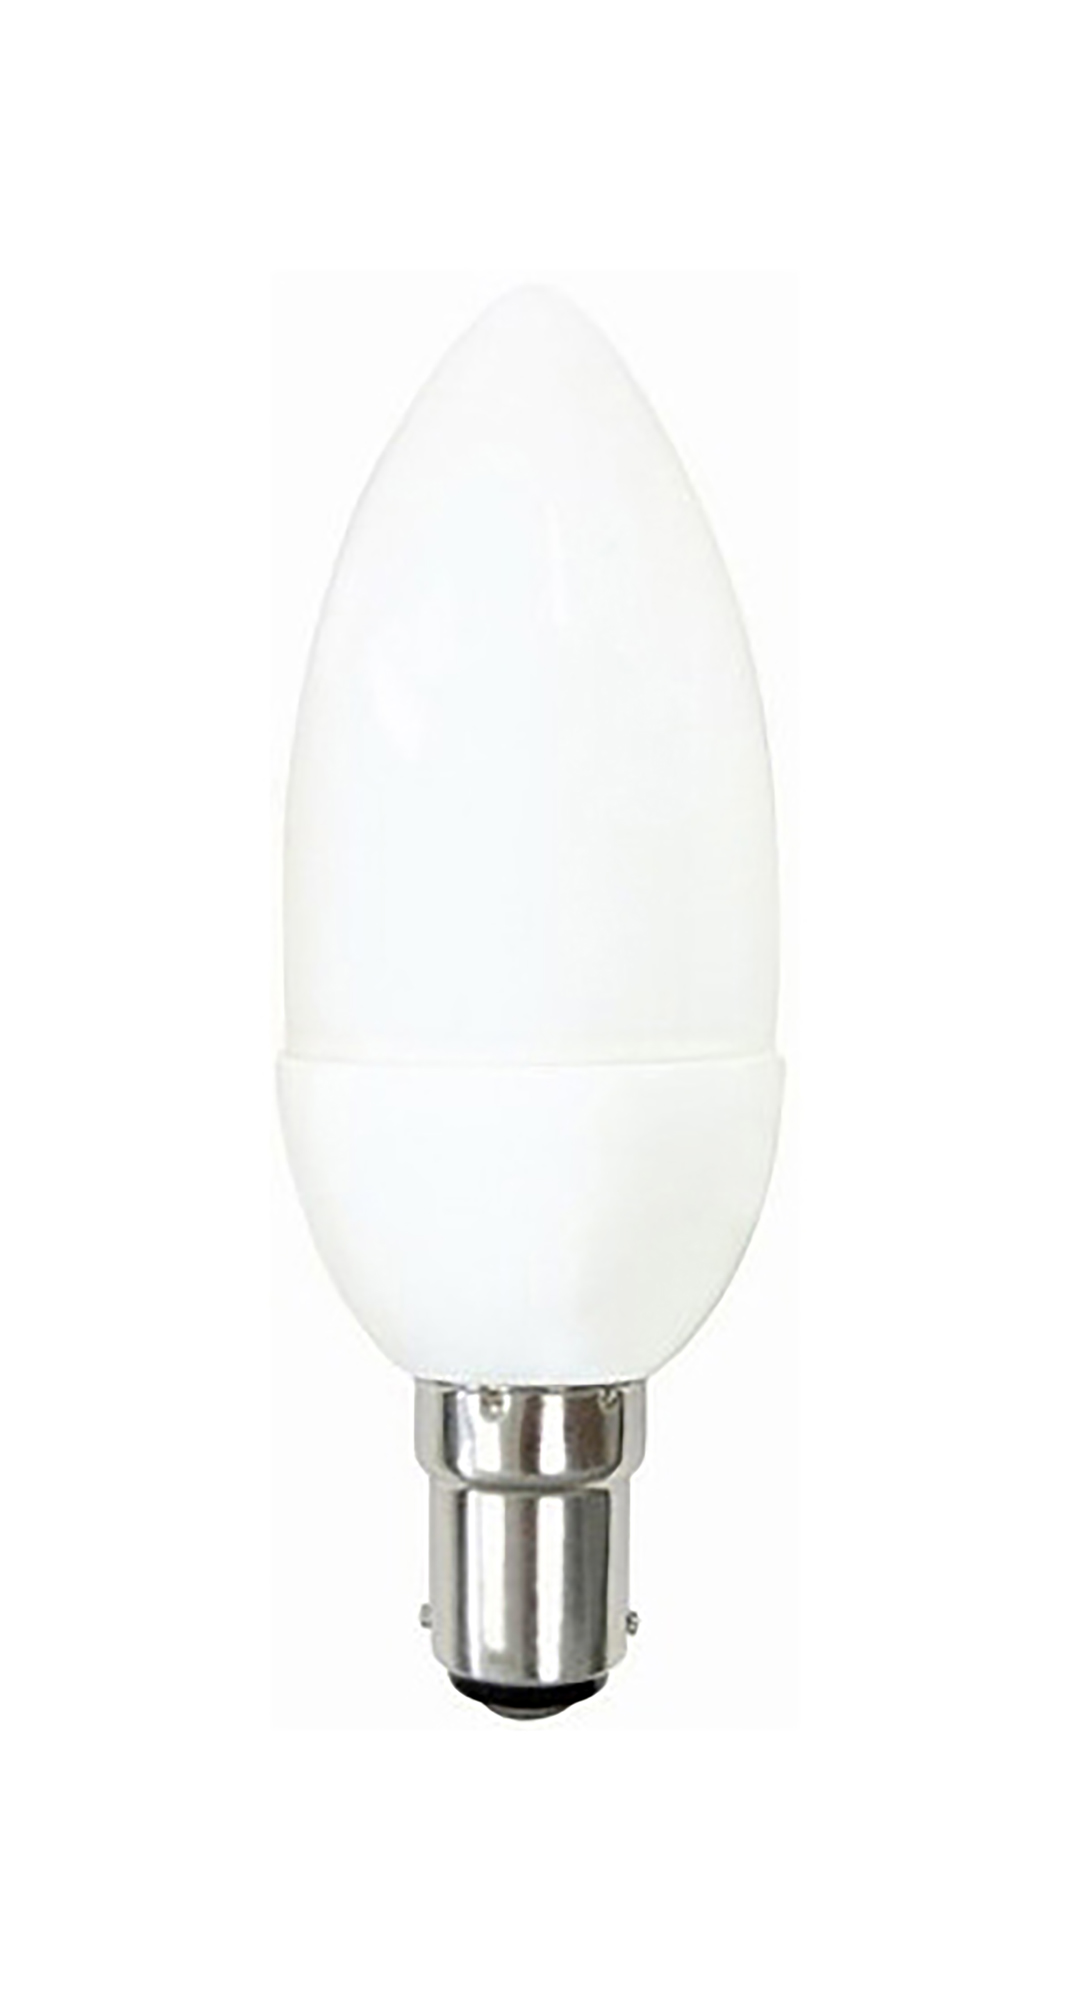 Extra Mini Sup Candle Compact Fluorescent Luxram Candle